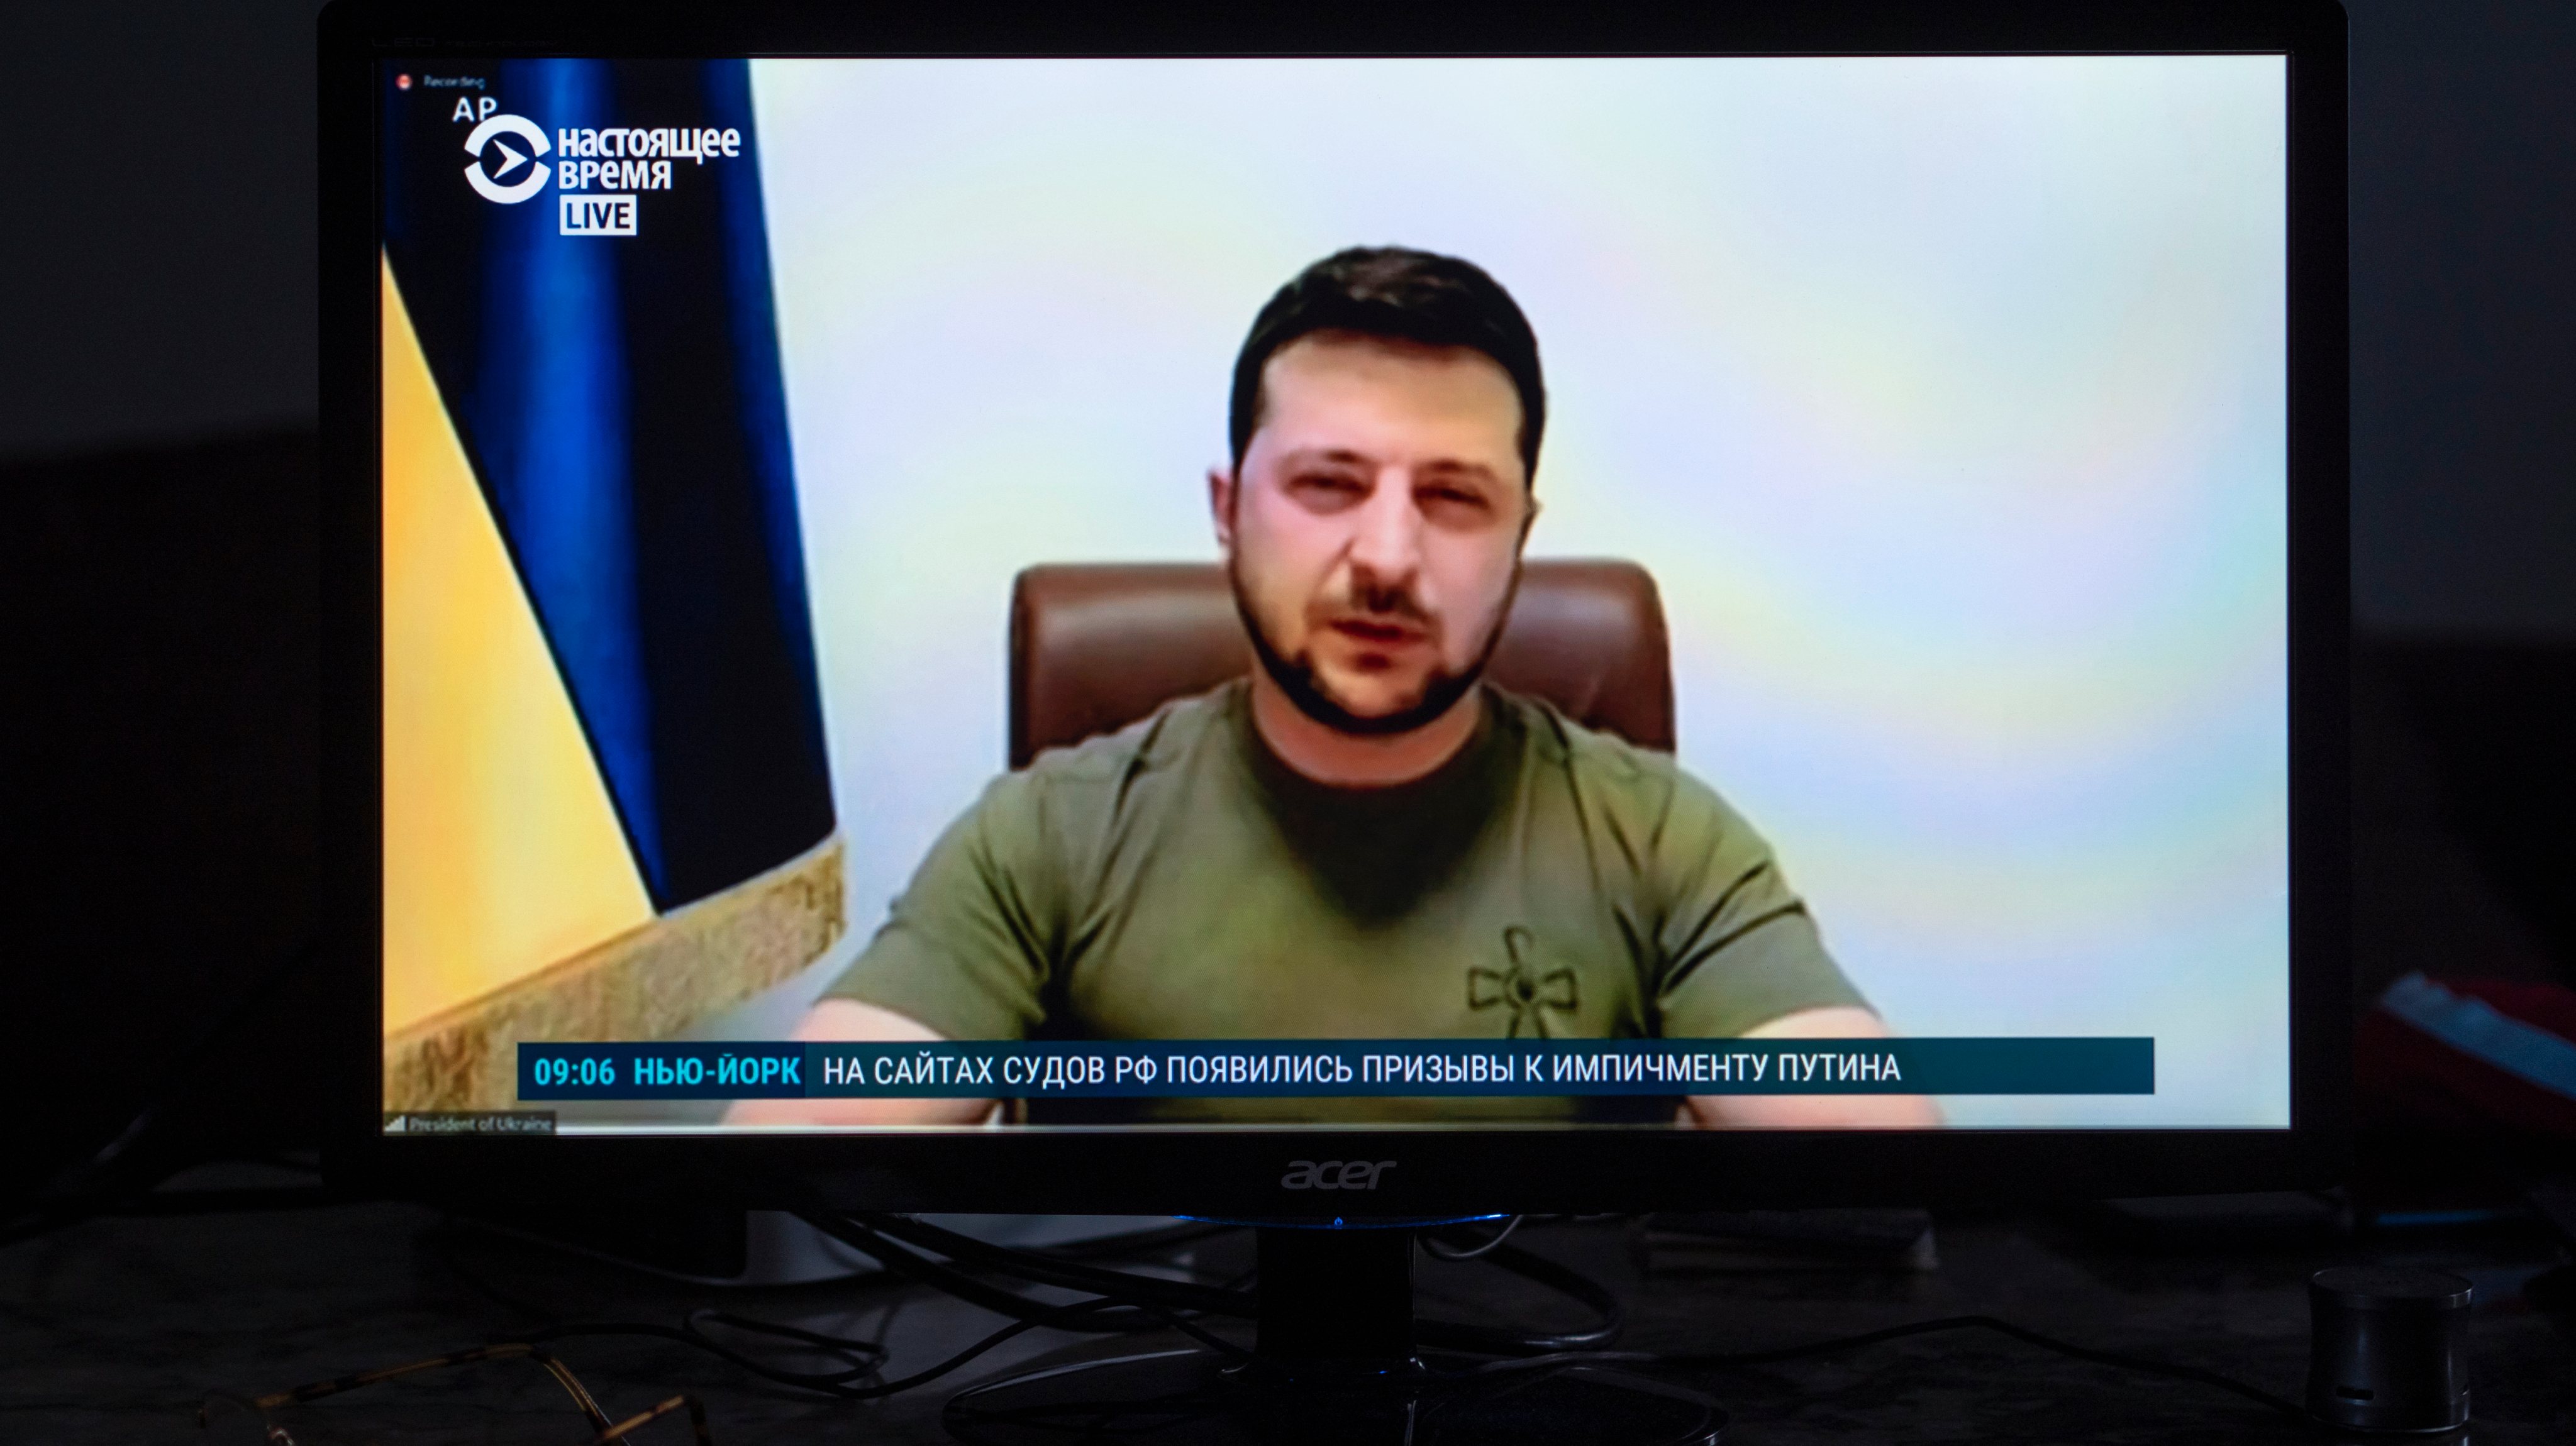 A screen grab of Volodymyr Zelensky delivering a speech to